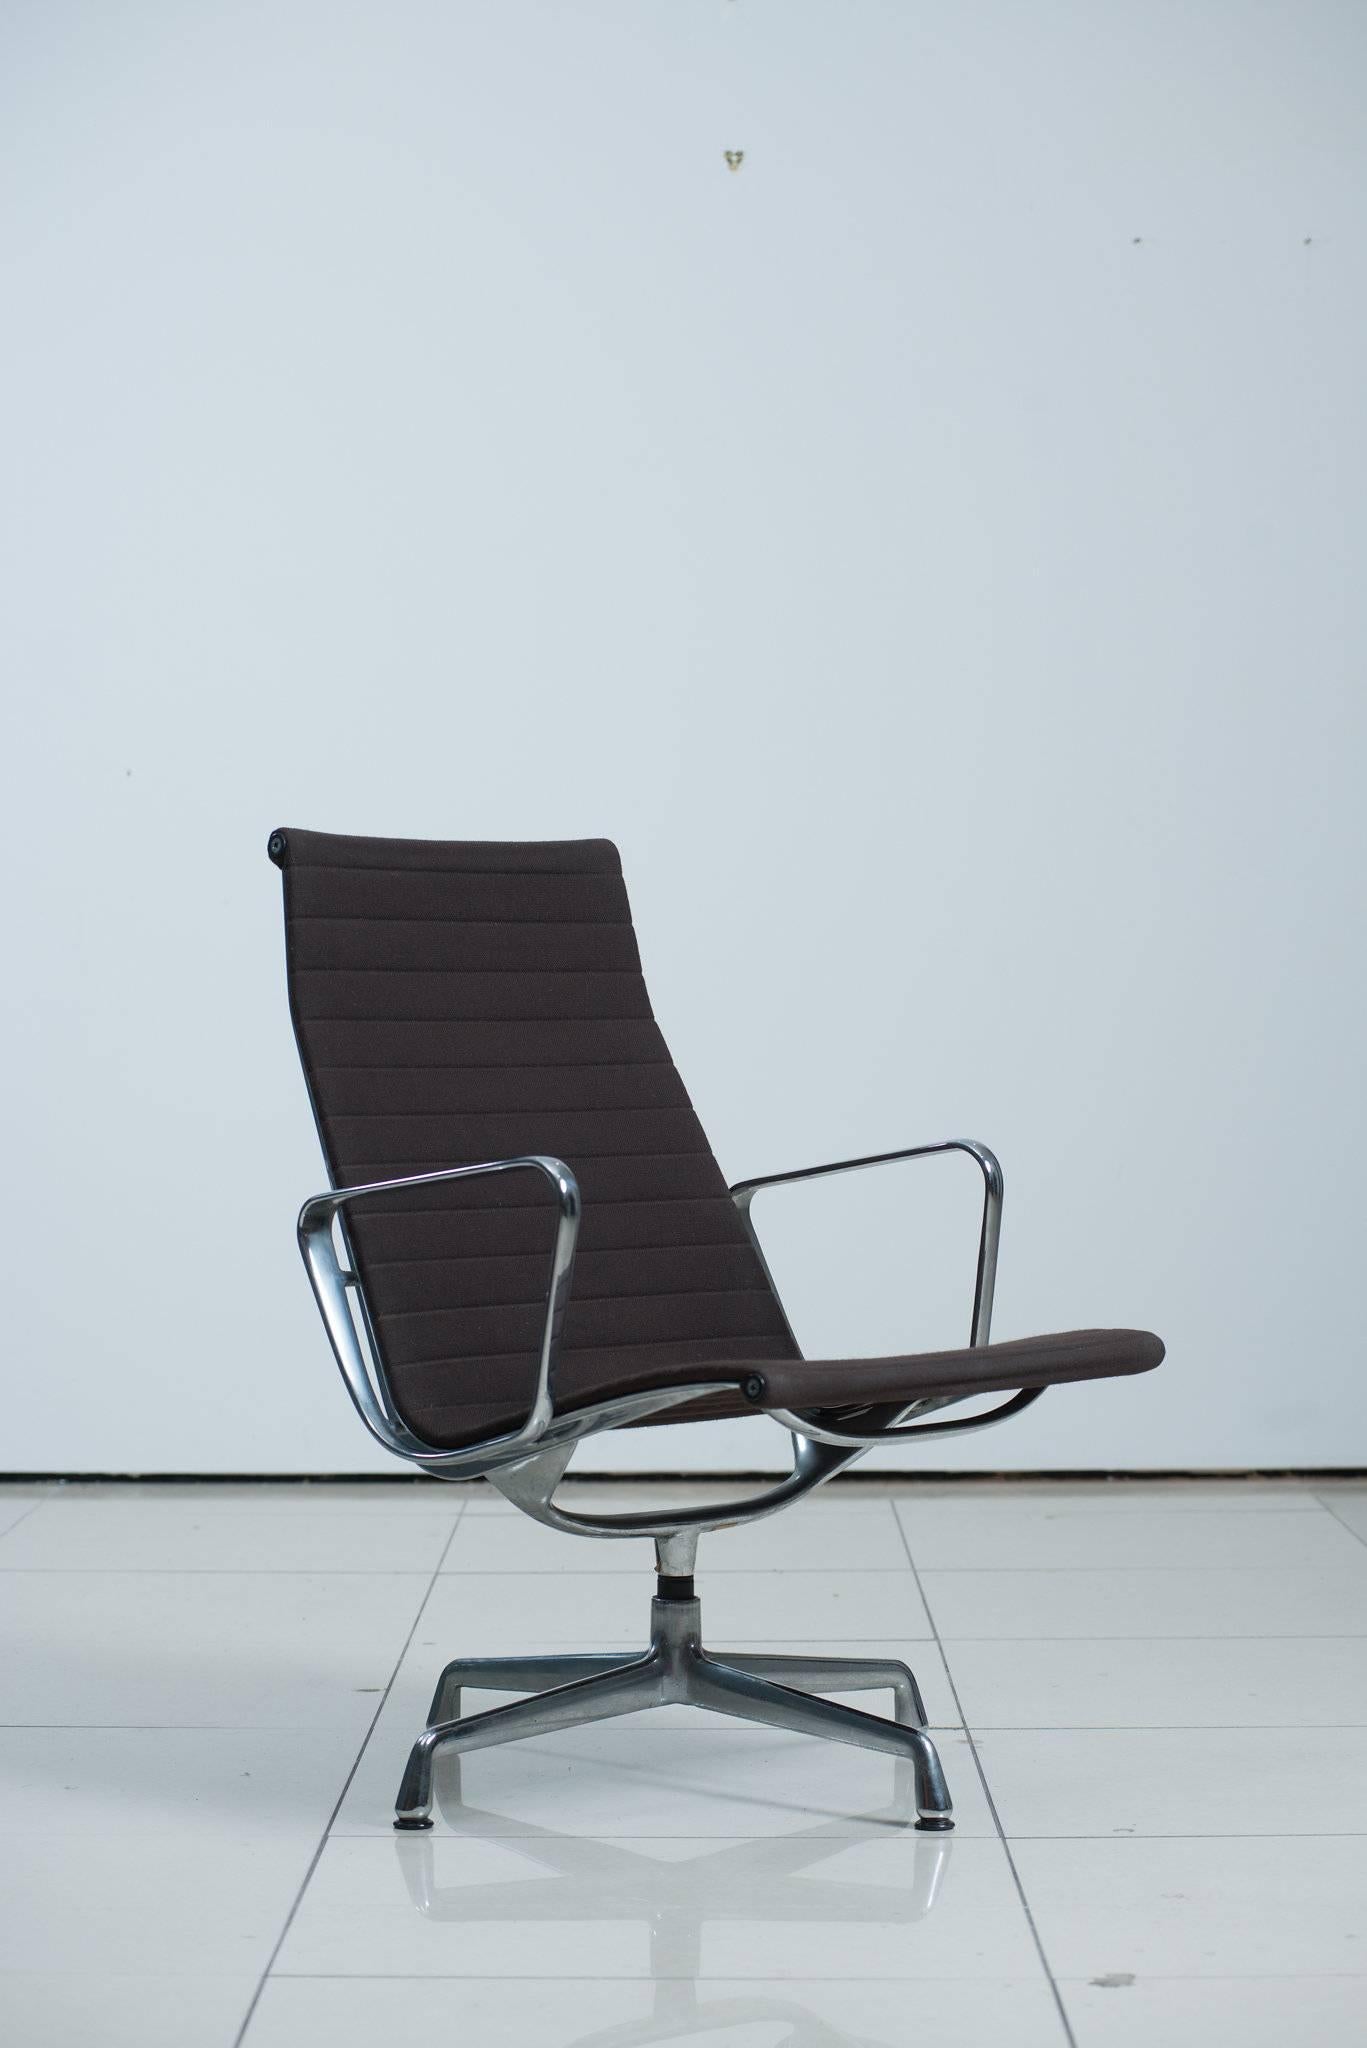 1960s Charles Eames EA 116 Hopsack swivel lounge armchair. Executed in aluminum and dark brown Hopsak fabric mounted on a swiveling four leg base. Designed in 1958 and considered one of the most iconic furniture designs of the 20th century.